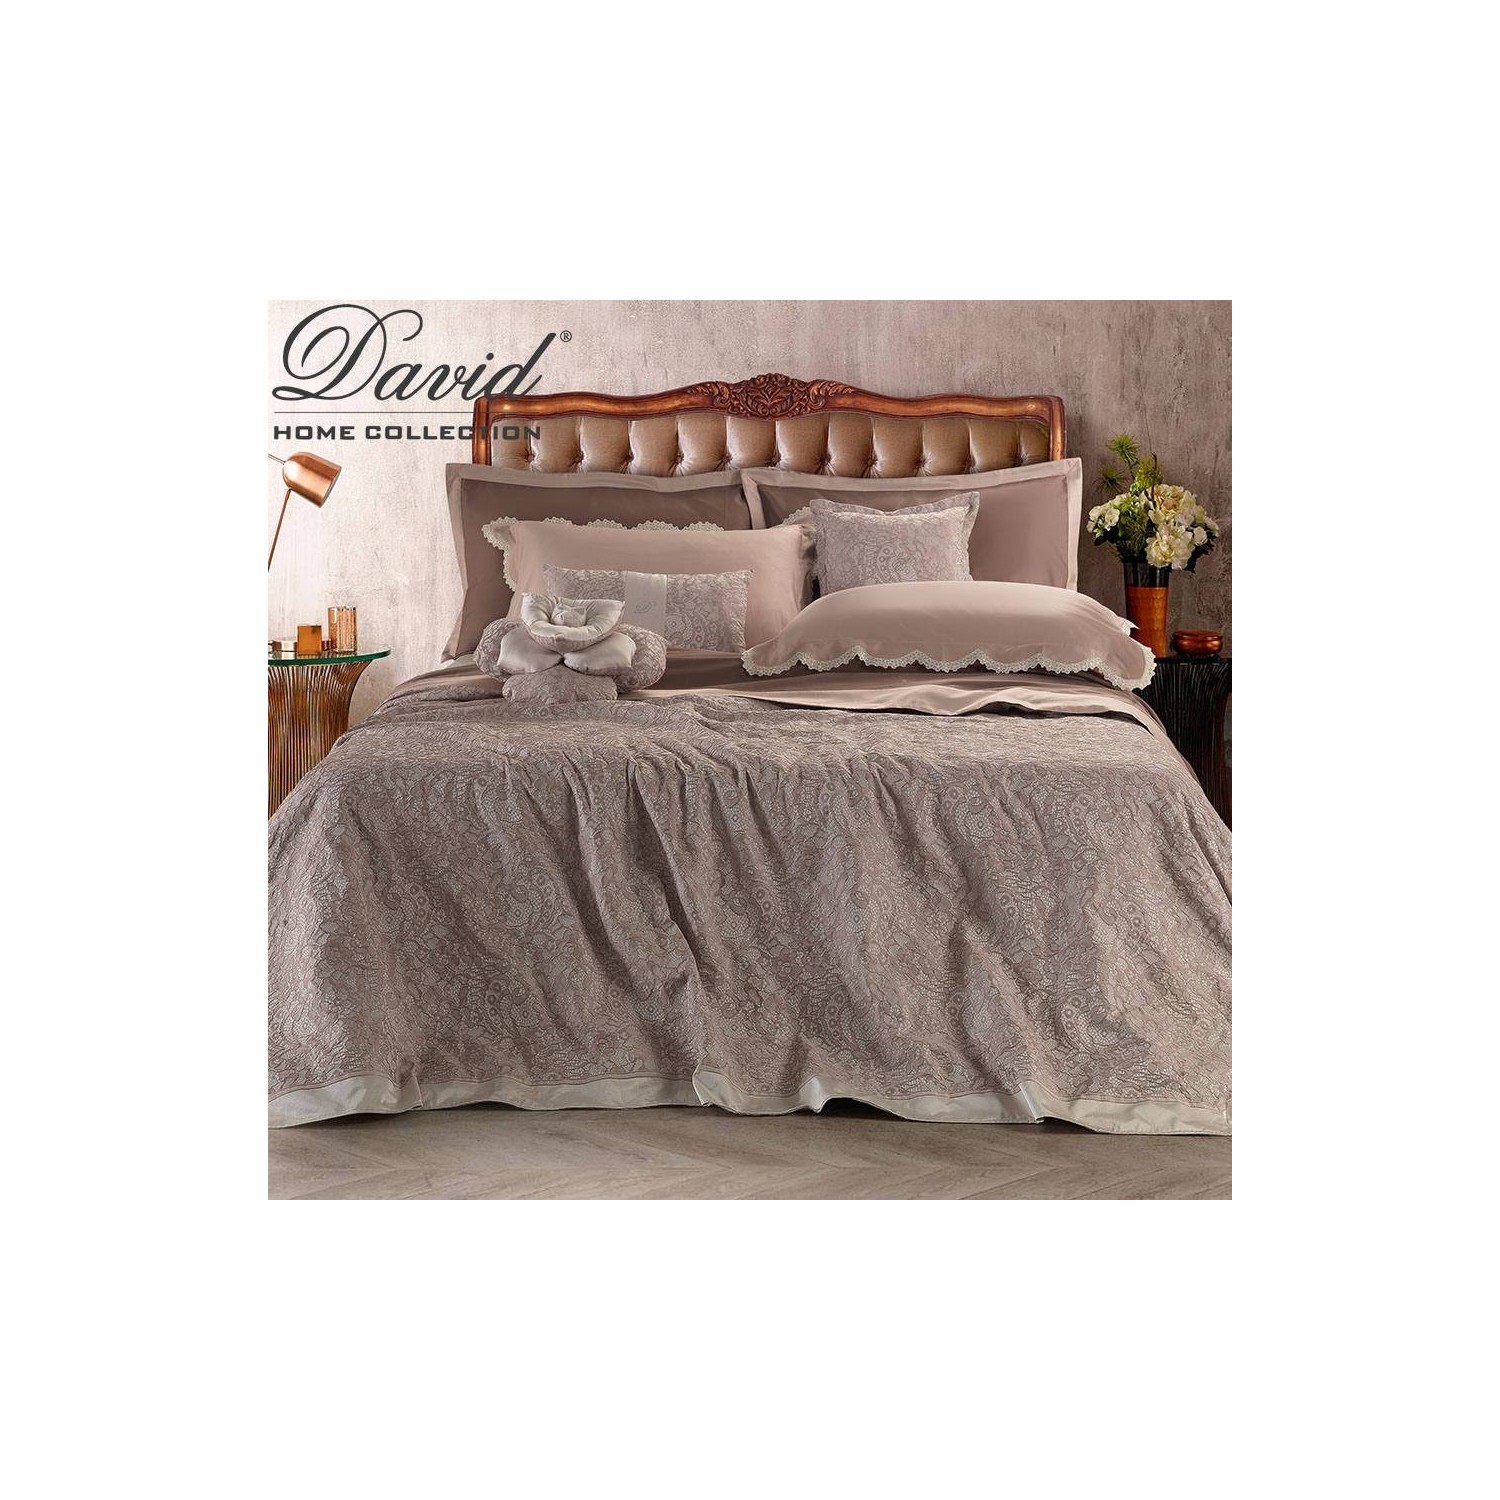 MELISSA - Classic Collection DAVID HOME